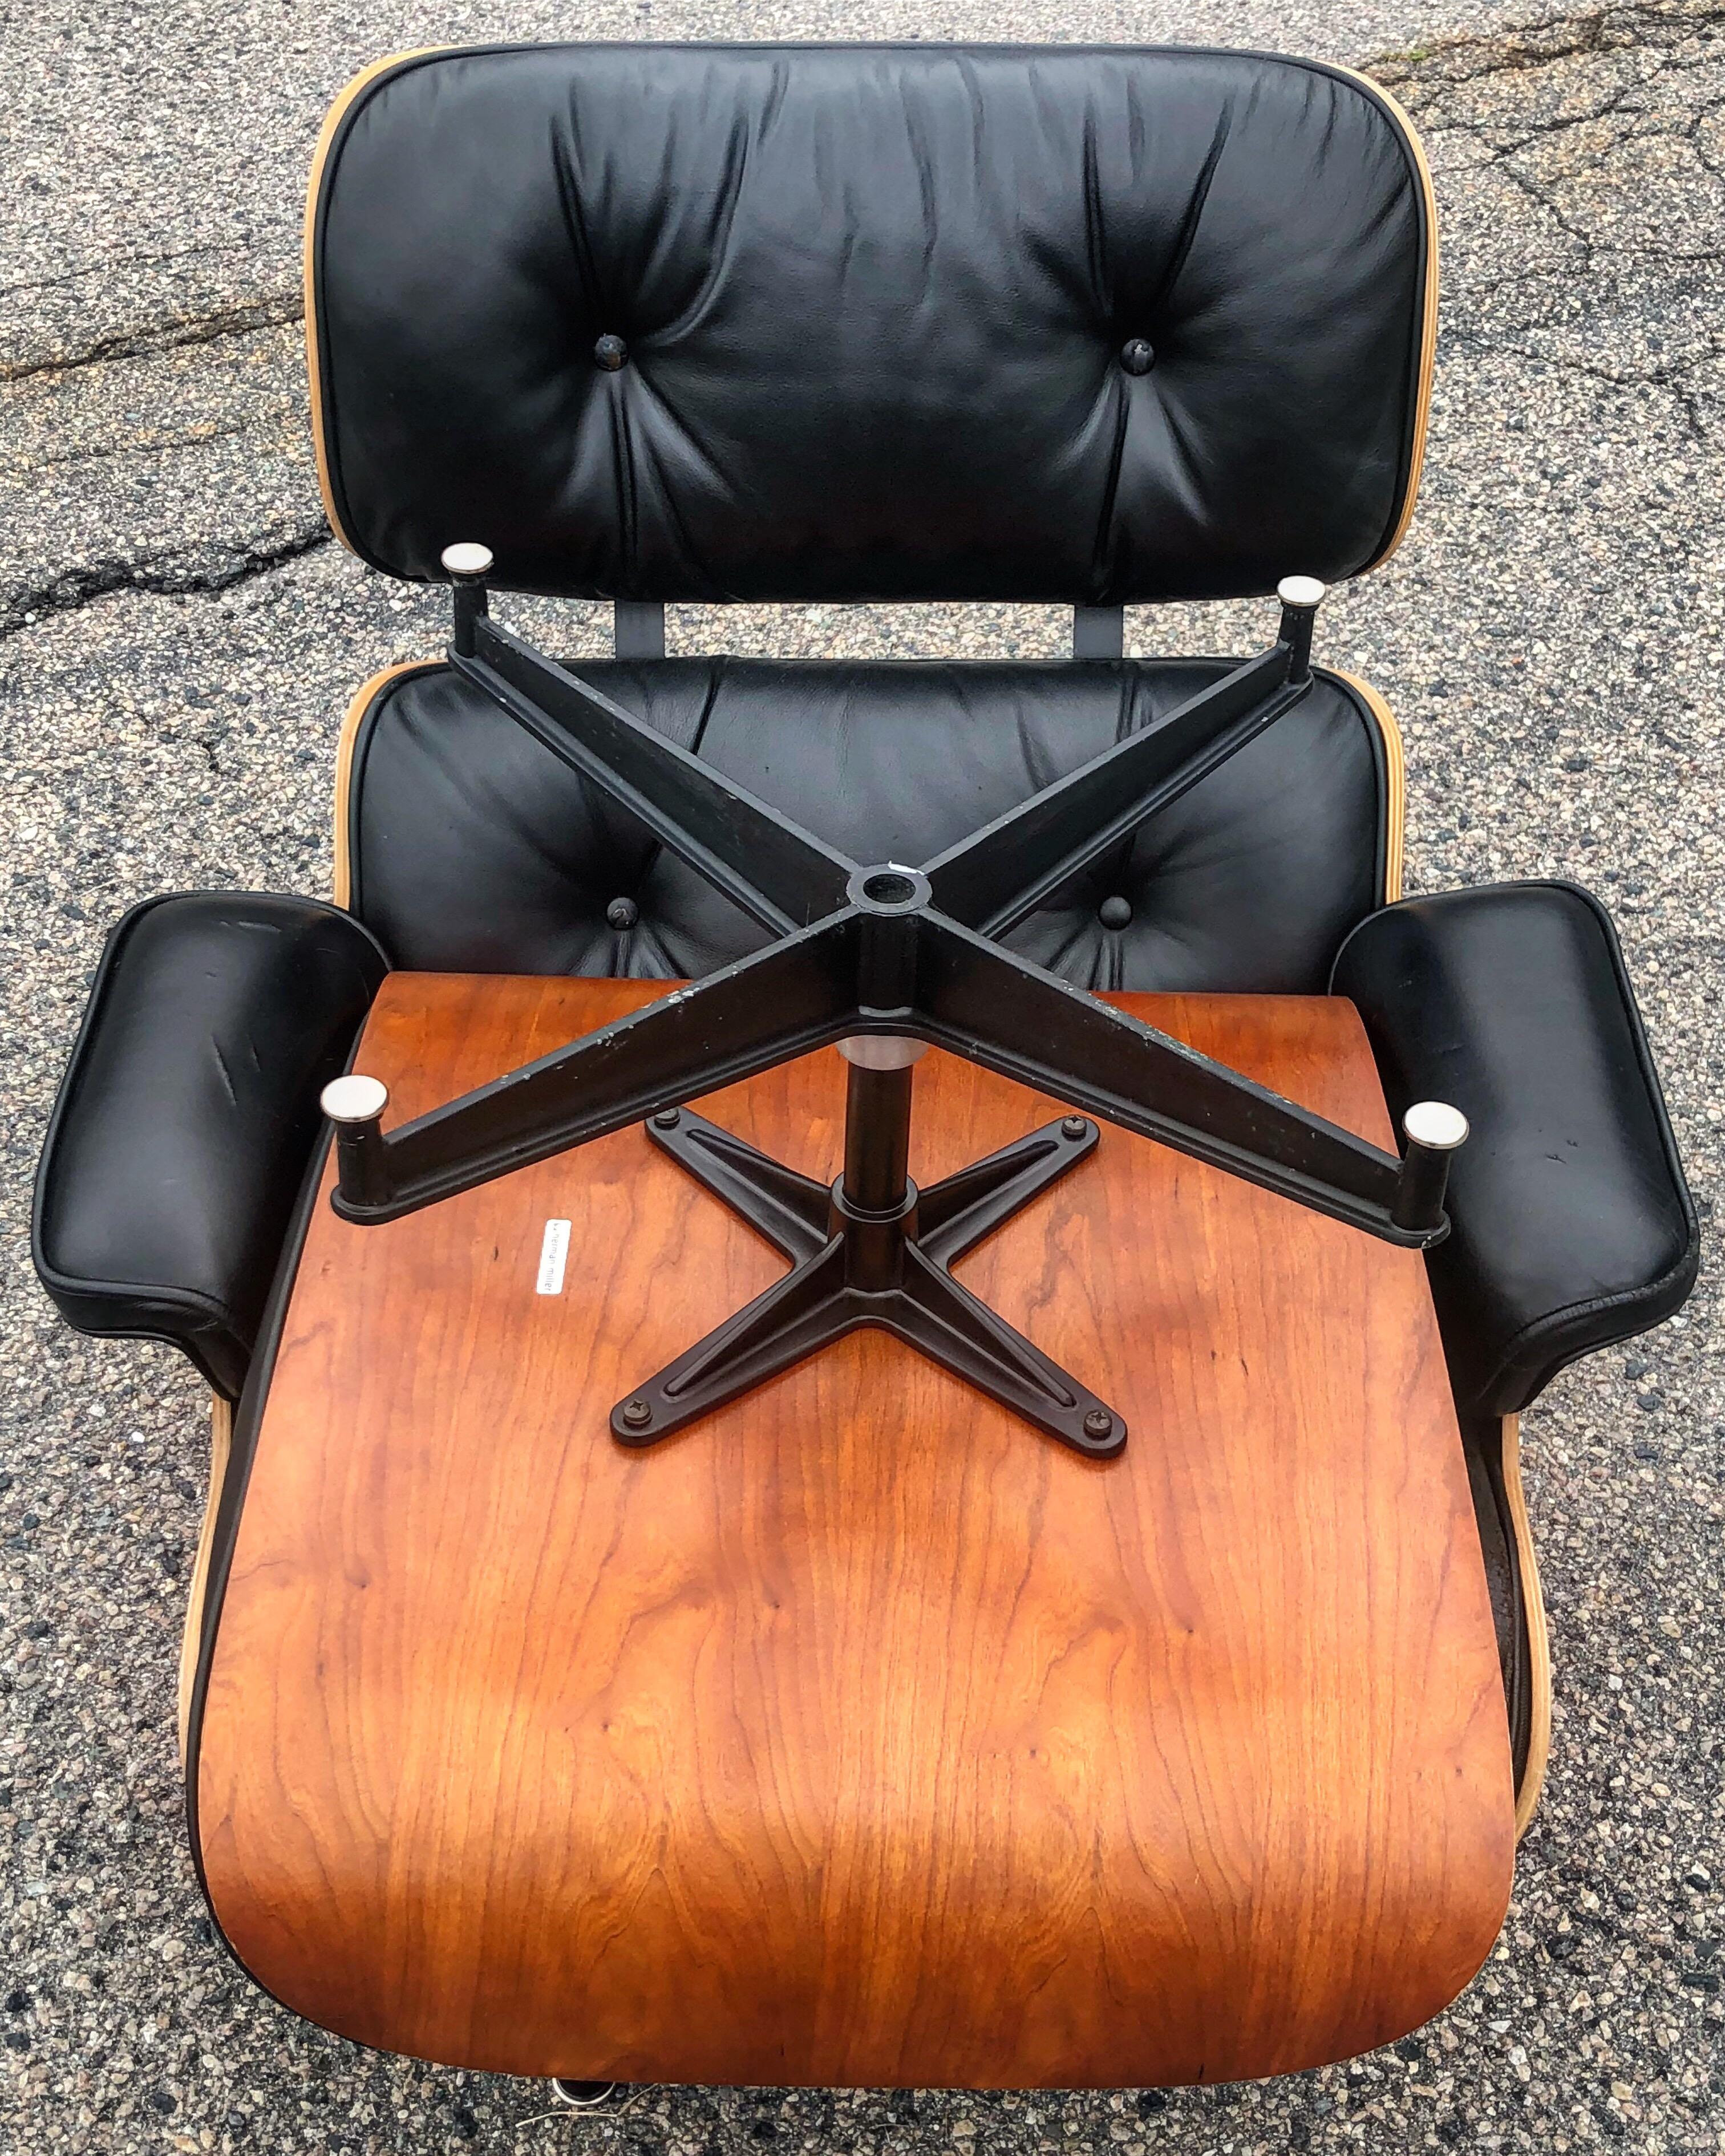 Herman Miller Eames lounge chair and ottoman. Gorgeous oiled cherry shells and original black leather. Wood near perfect. A gorgeous edition of the design classic. Signed Herman Miller.